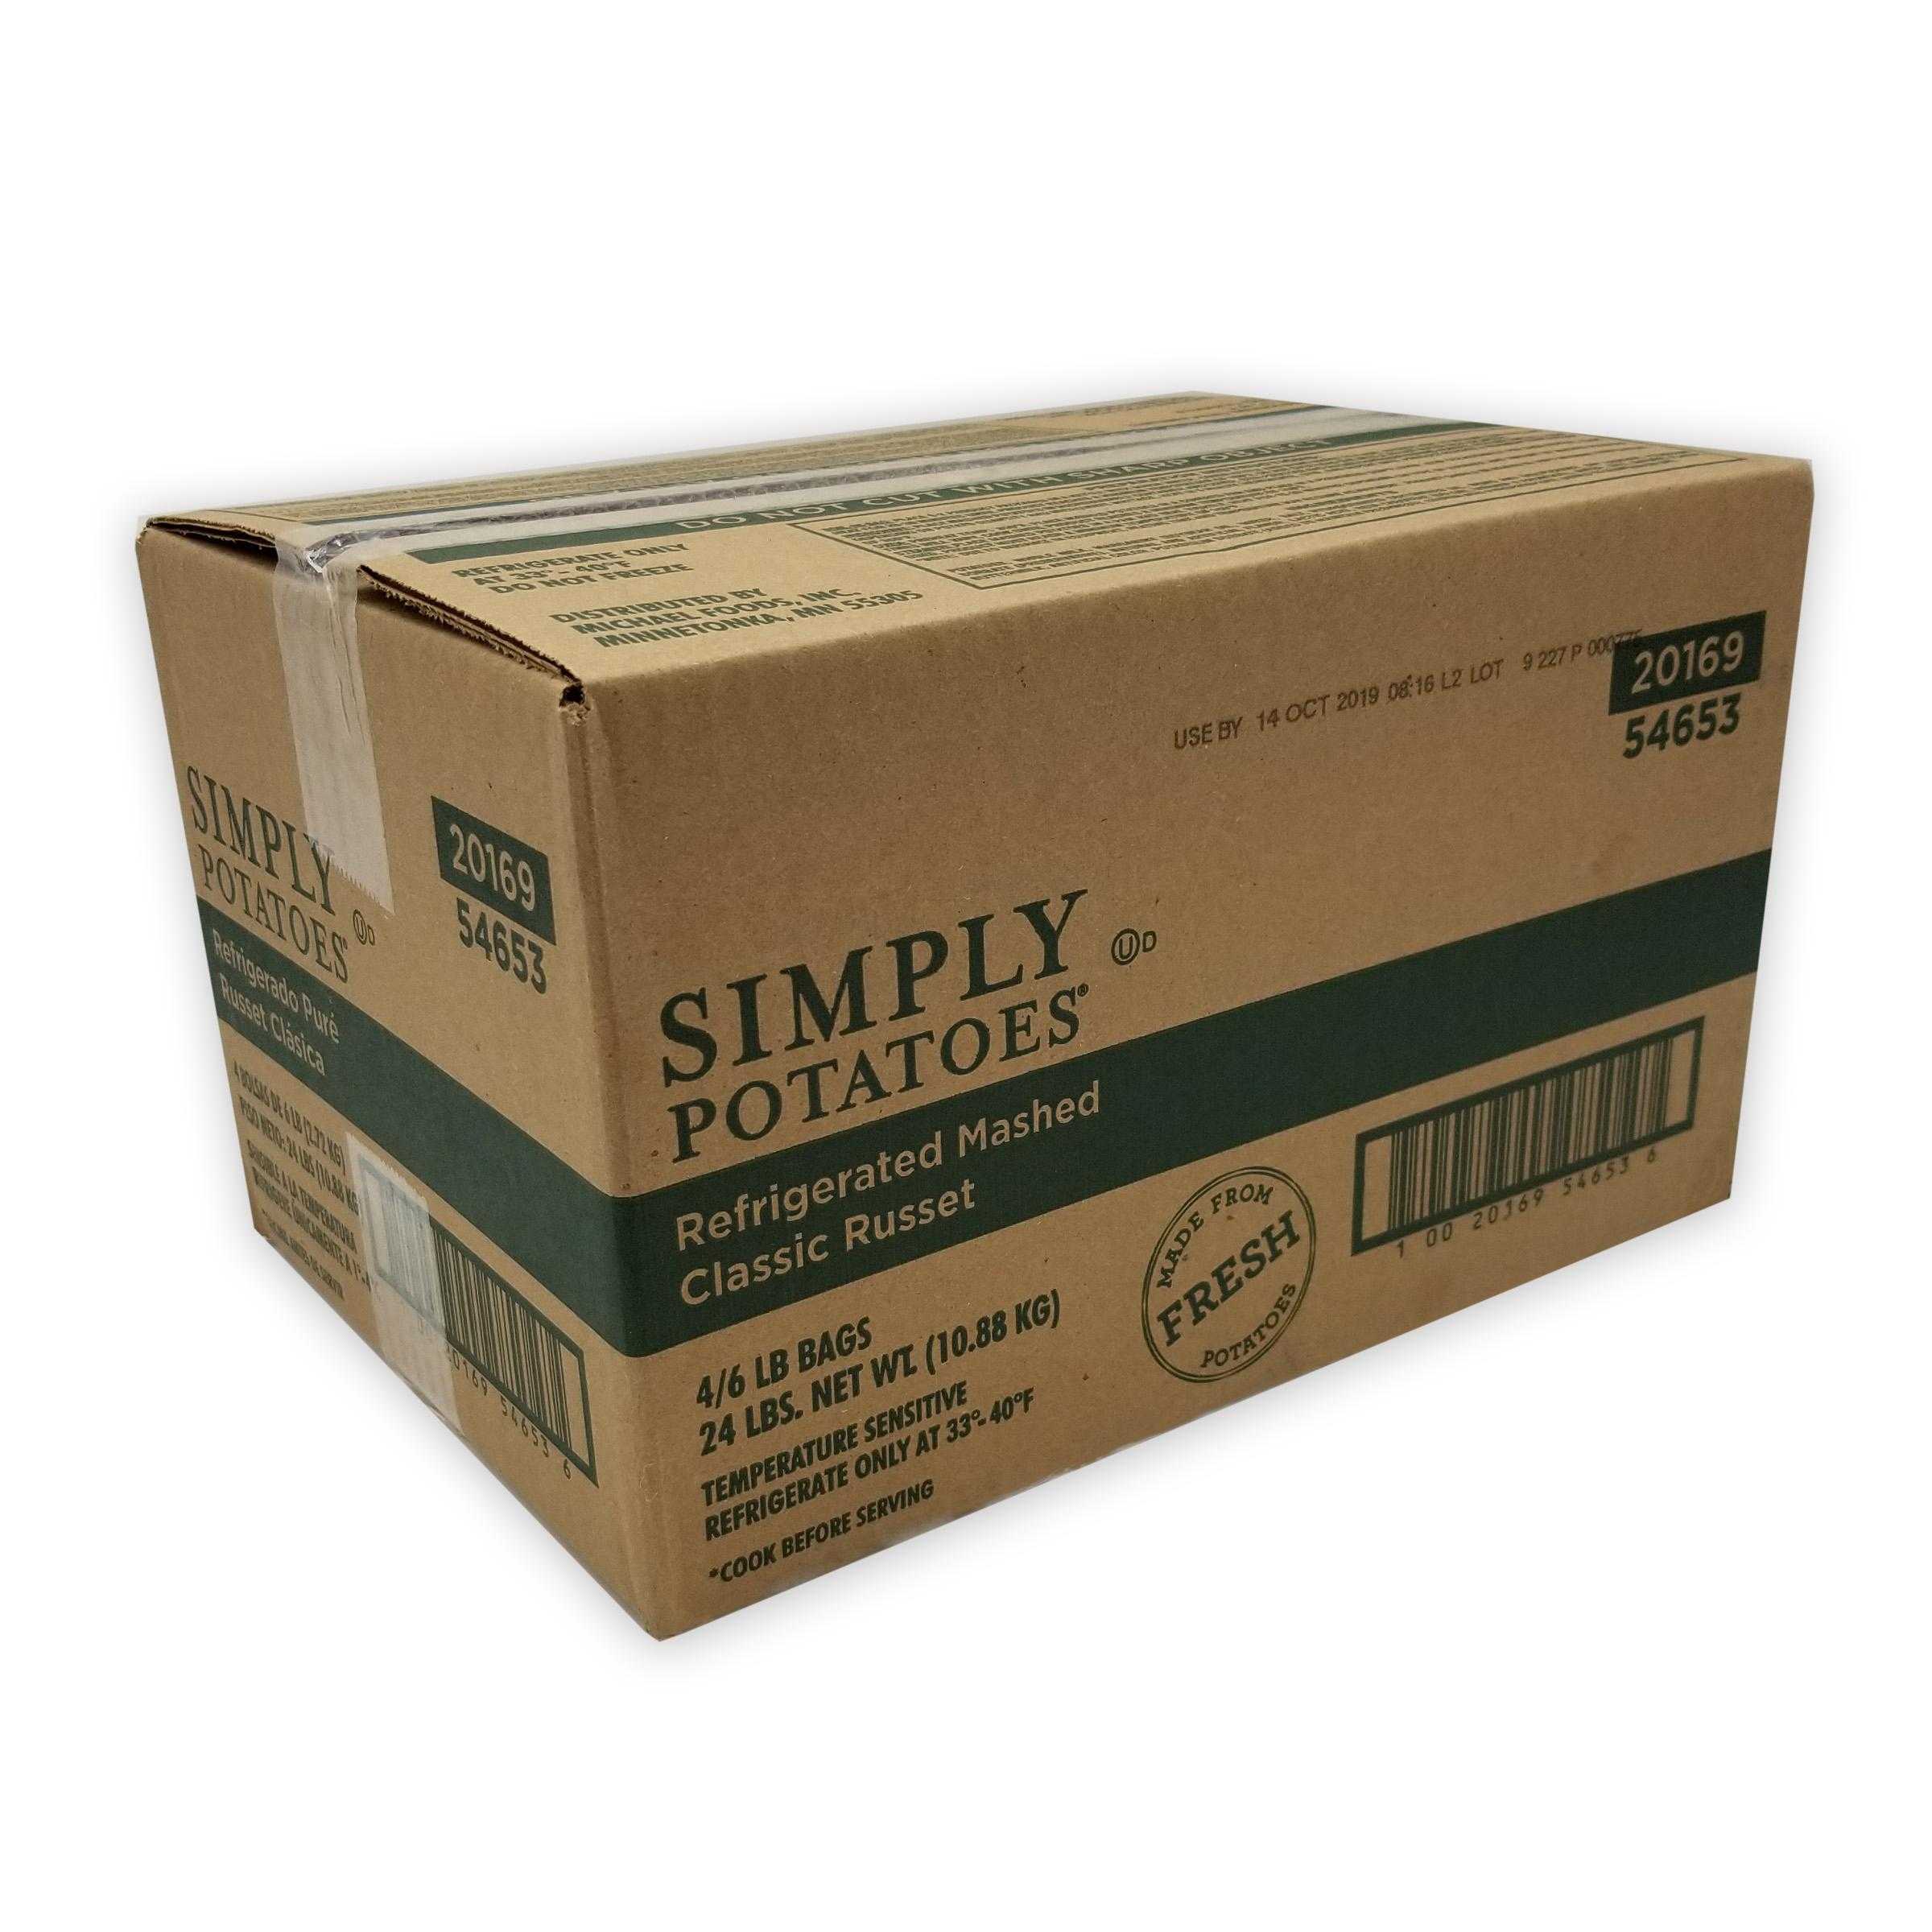 Simply Potatoes, Refrigerated Classic Russet Mashed Potatoes, Peeled Russet Potatoes, 4/6 Lb Bags